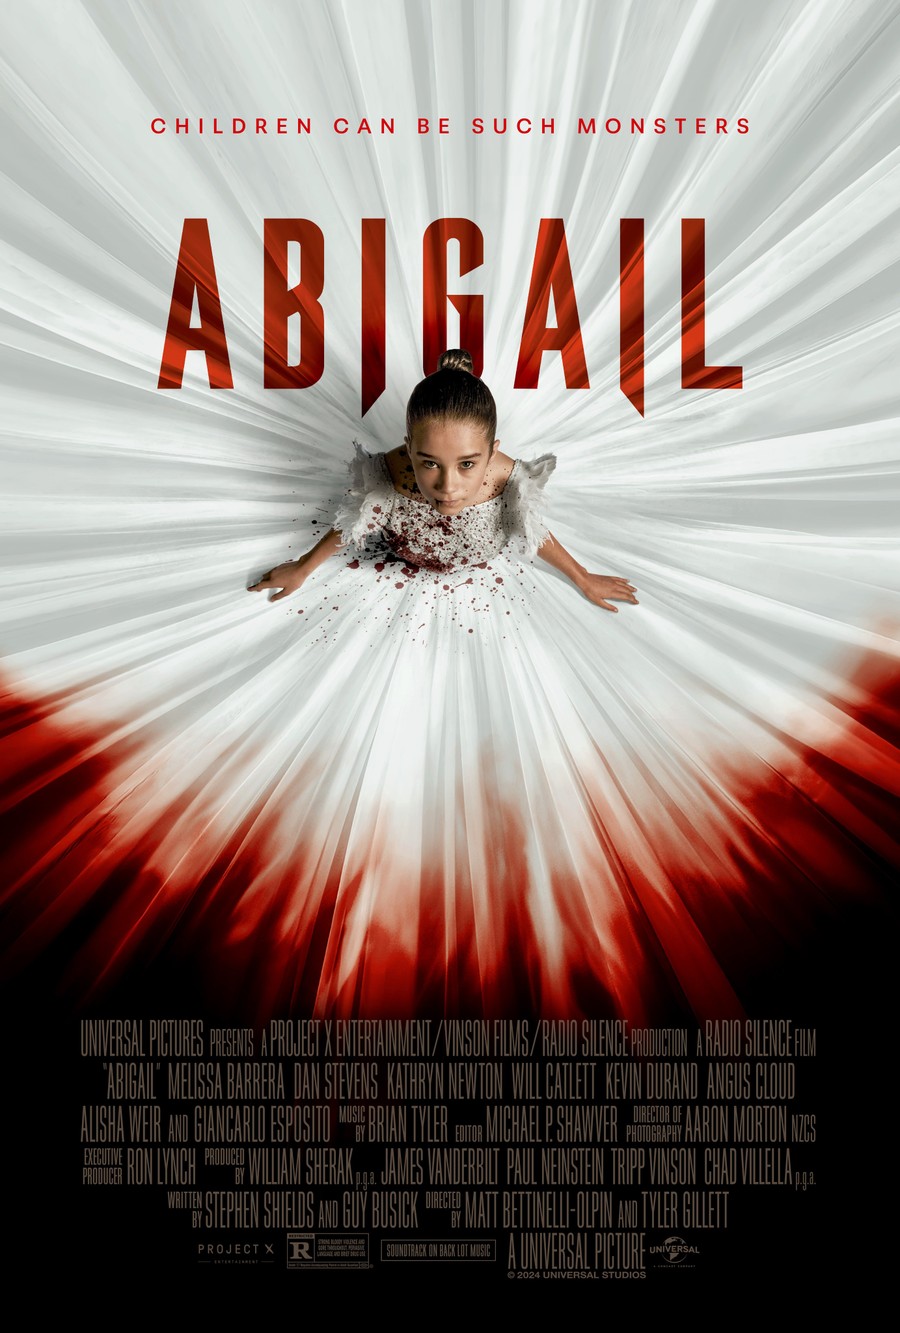 Poster for Abigail